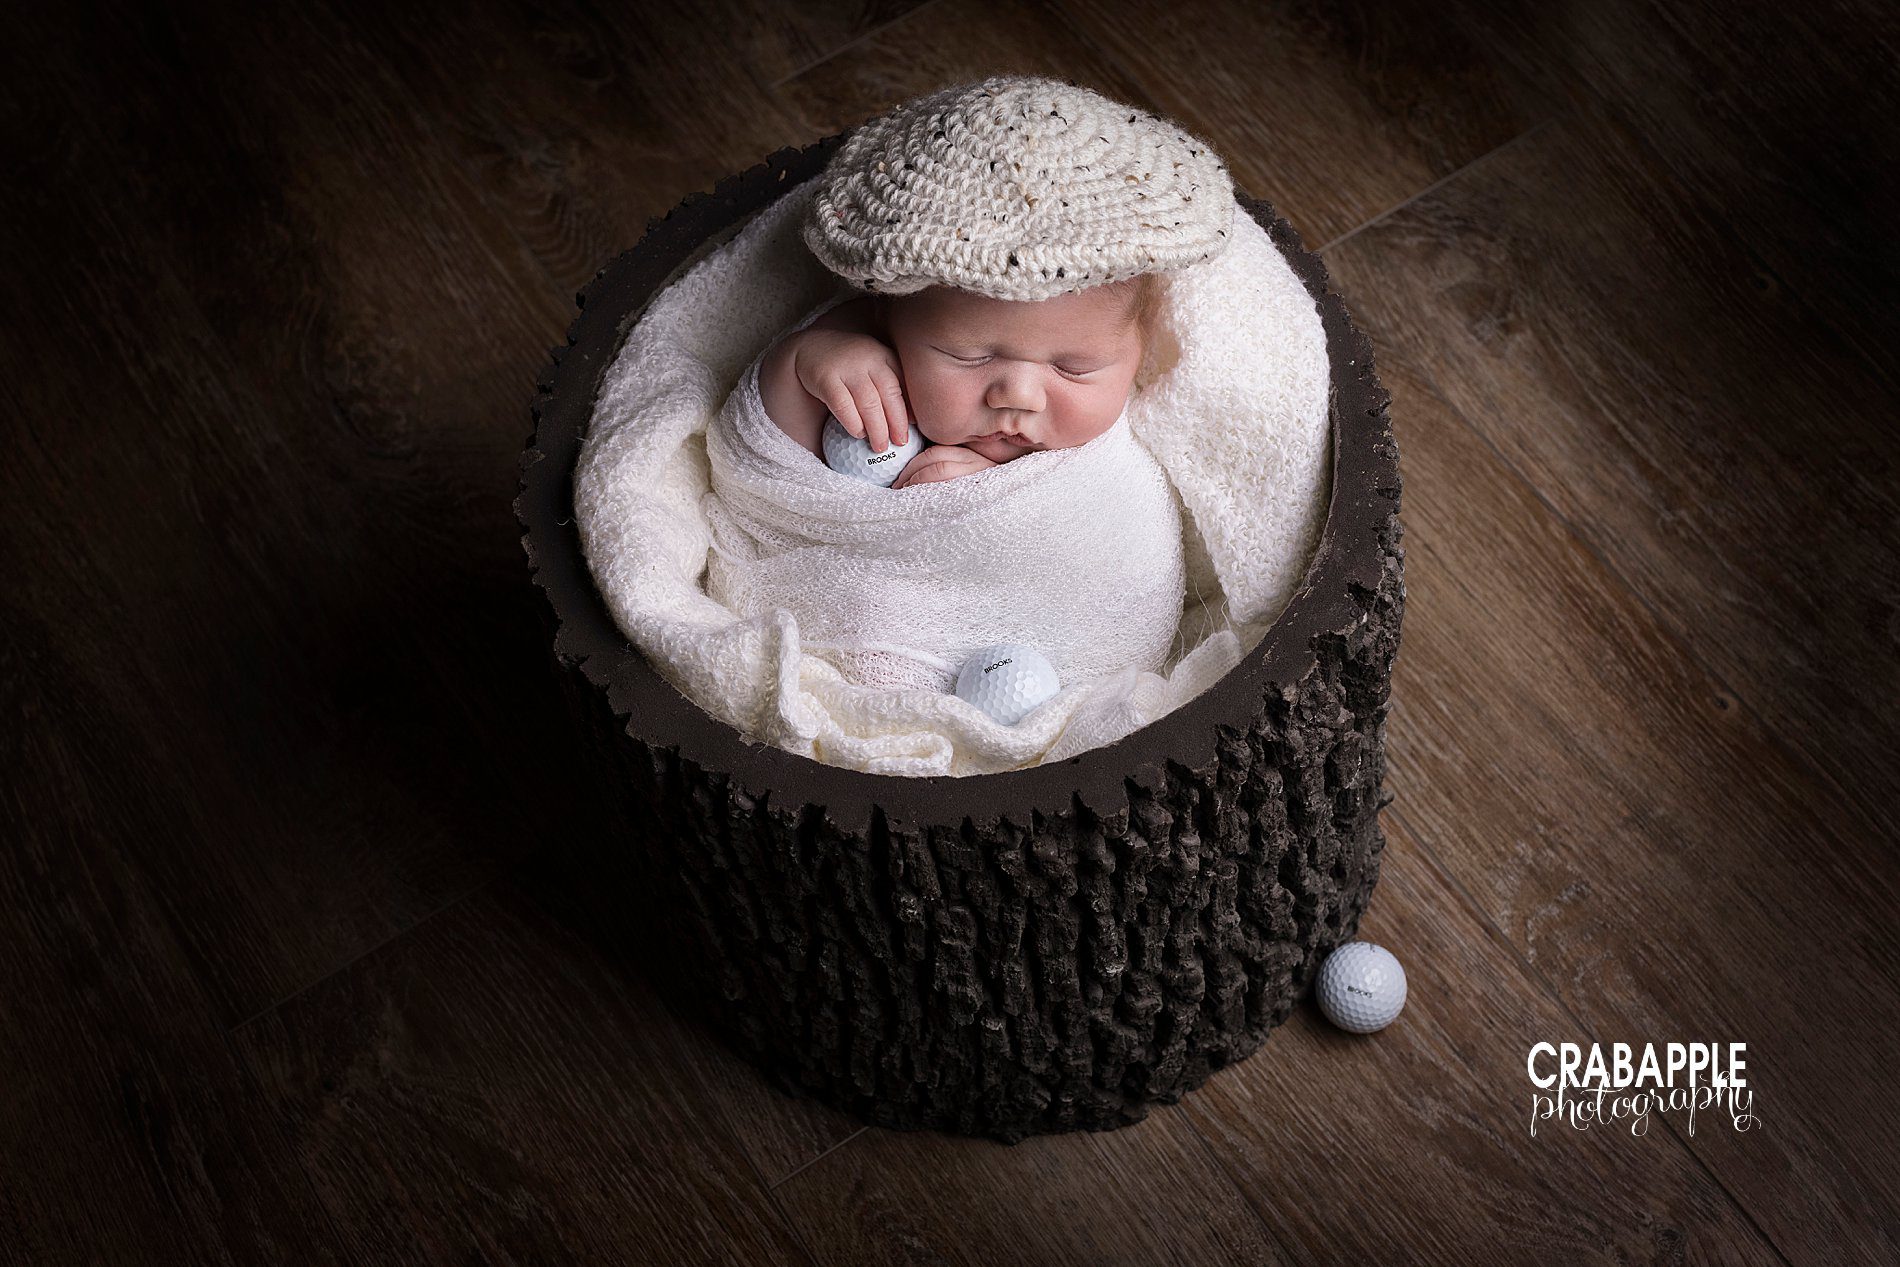 Classic golf themed newborn portraits with knit hat and custom golf balls with baby's name